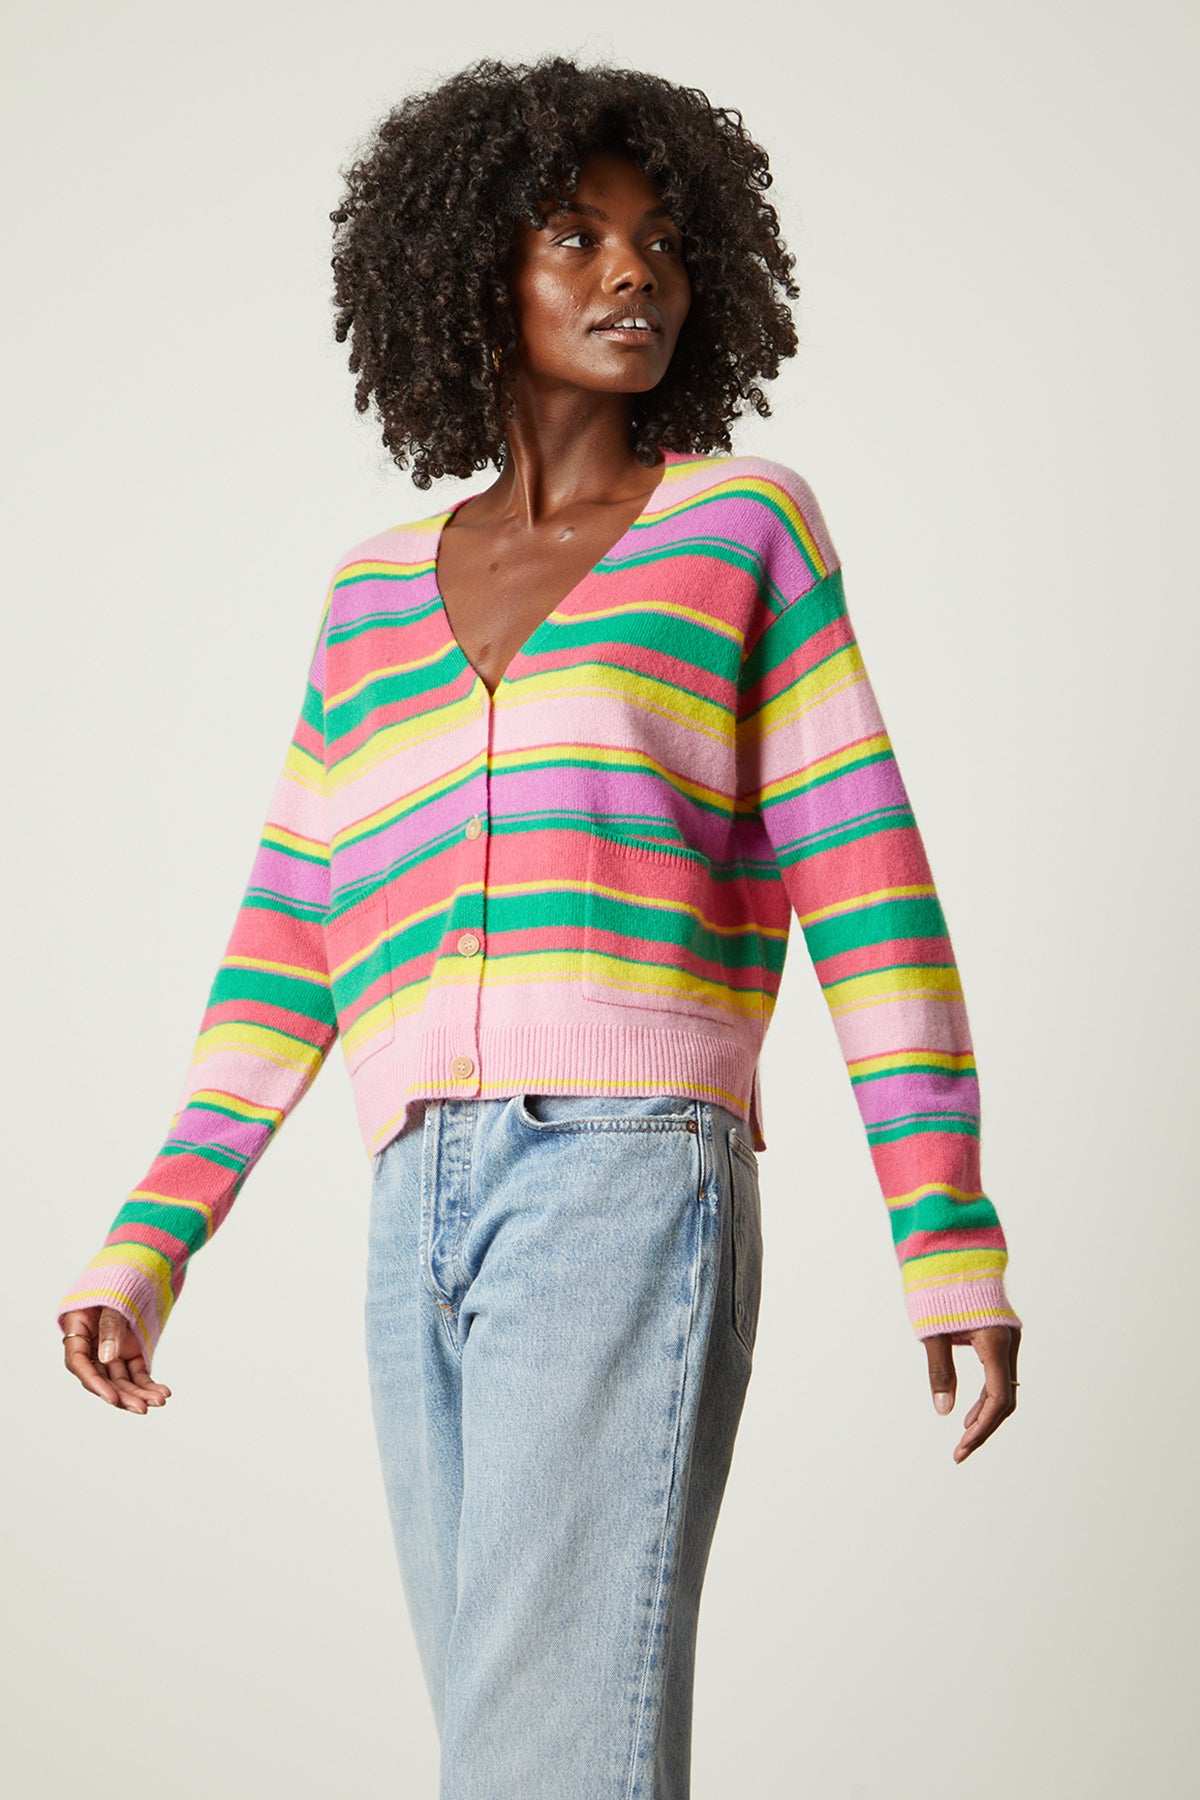 A model wearing a Velvet by Graham & Spencer JANESSA CASHMERE STRIPED CARDIGAN, a vintage-inspired, colorful striped cardigan.-26496305168577